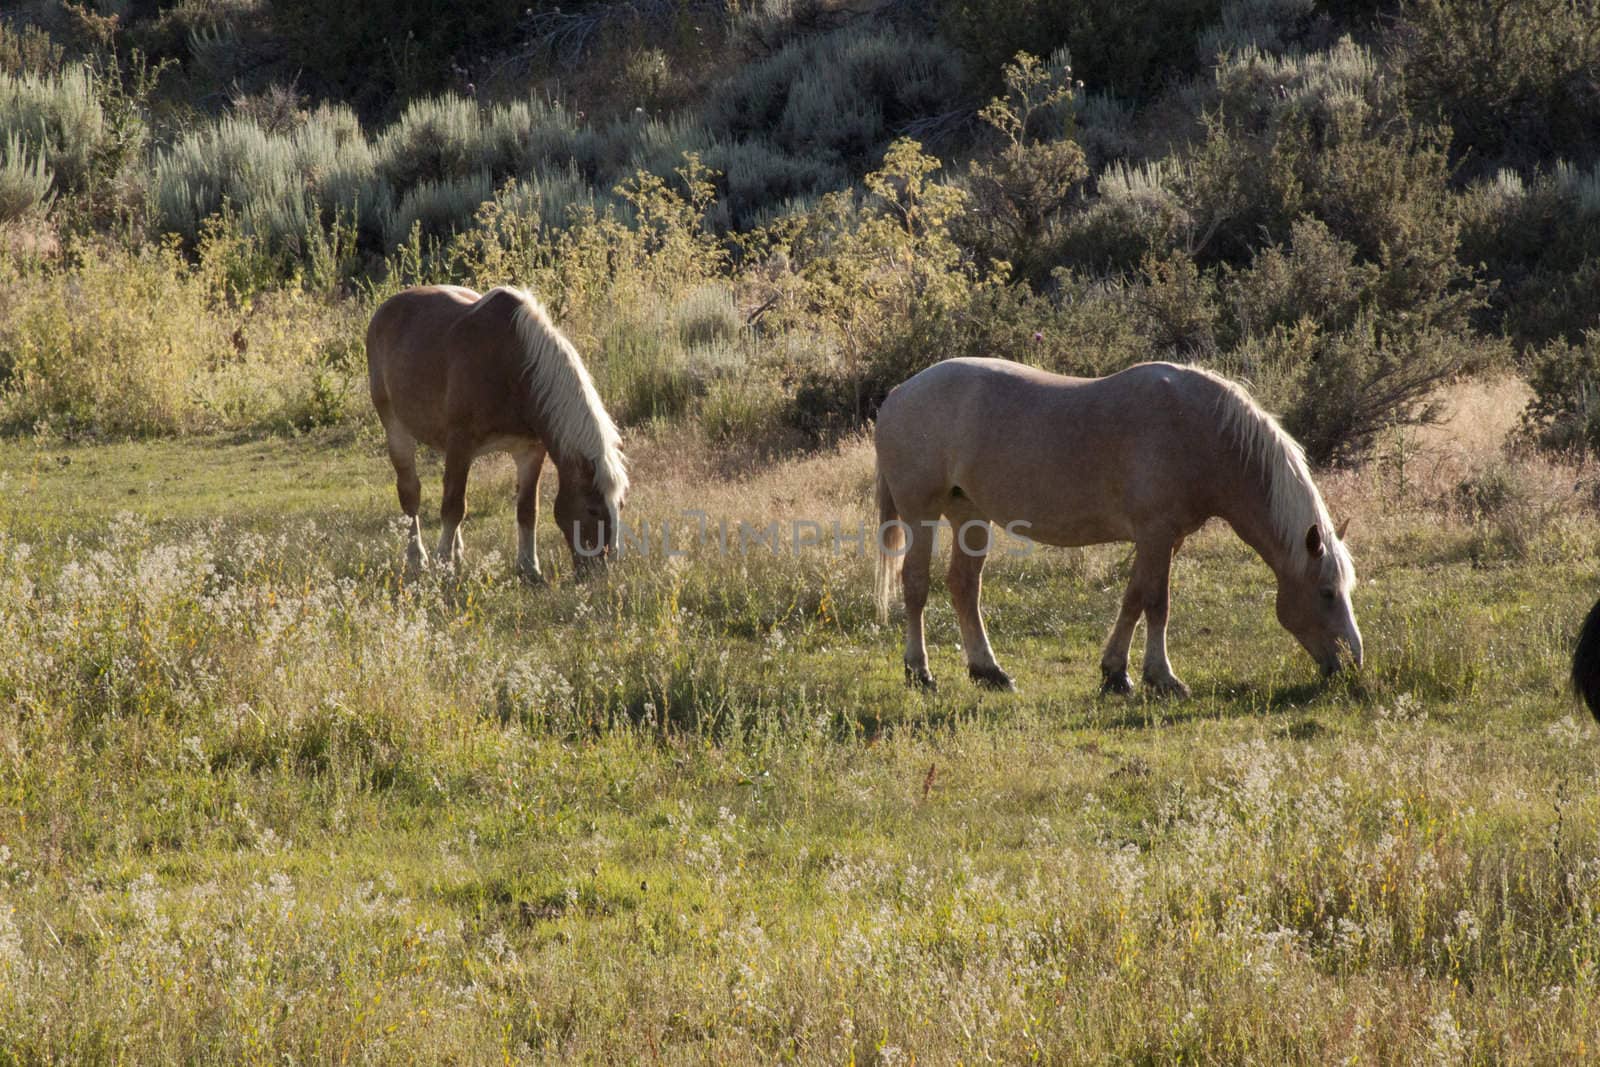 Beautiful horses in a pasture eating grass and hanging out with other horses.